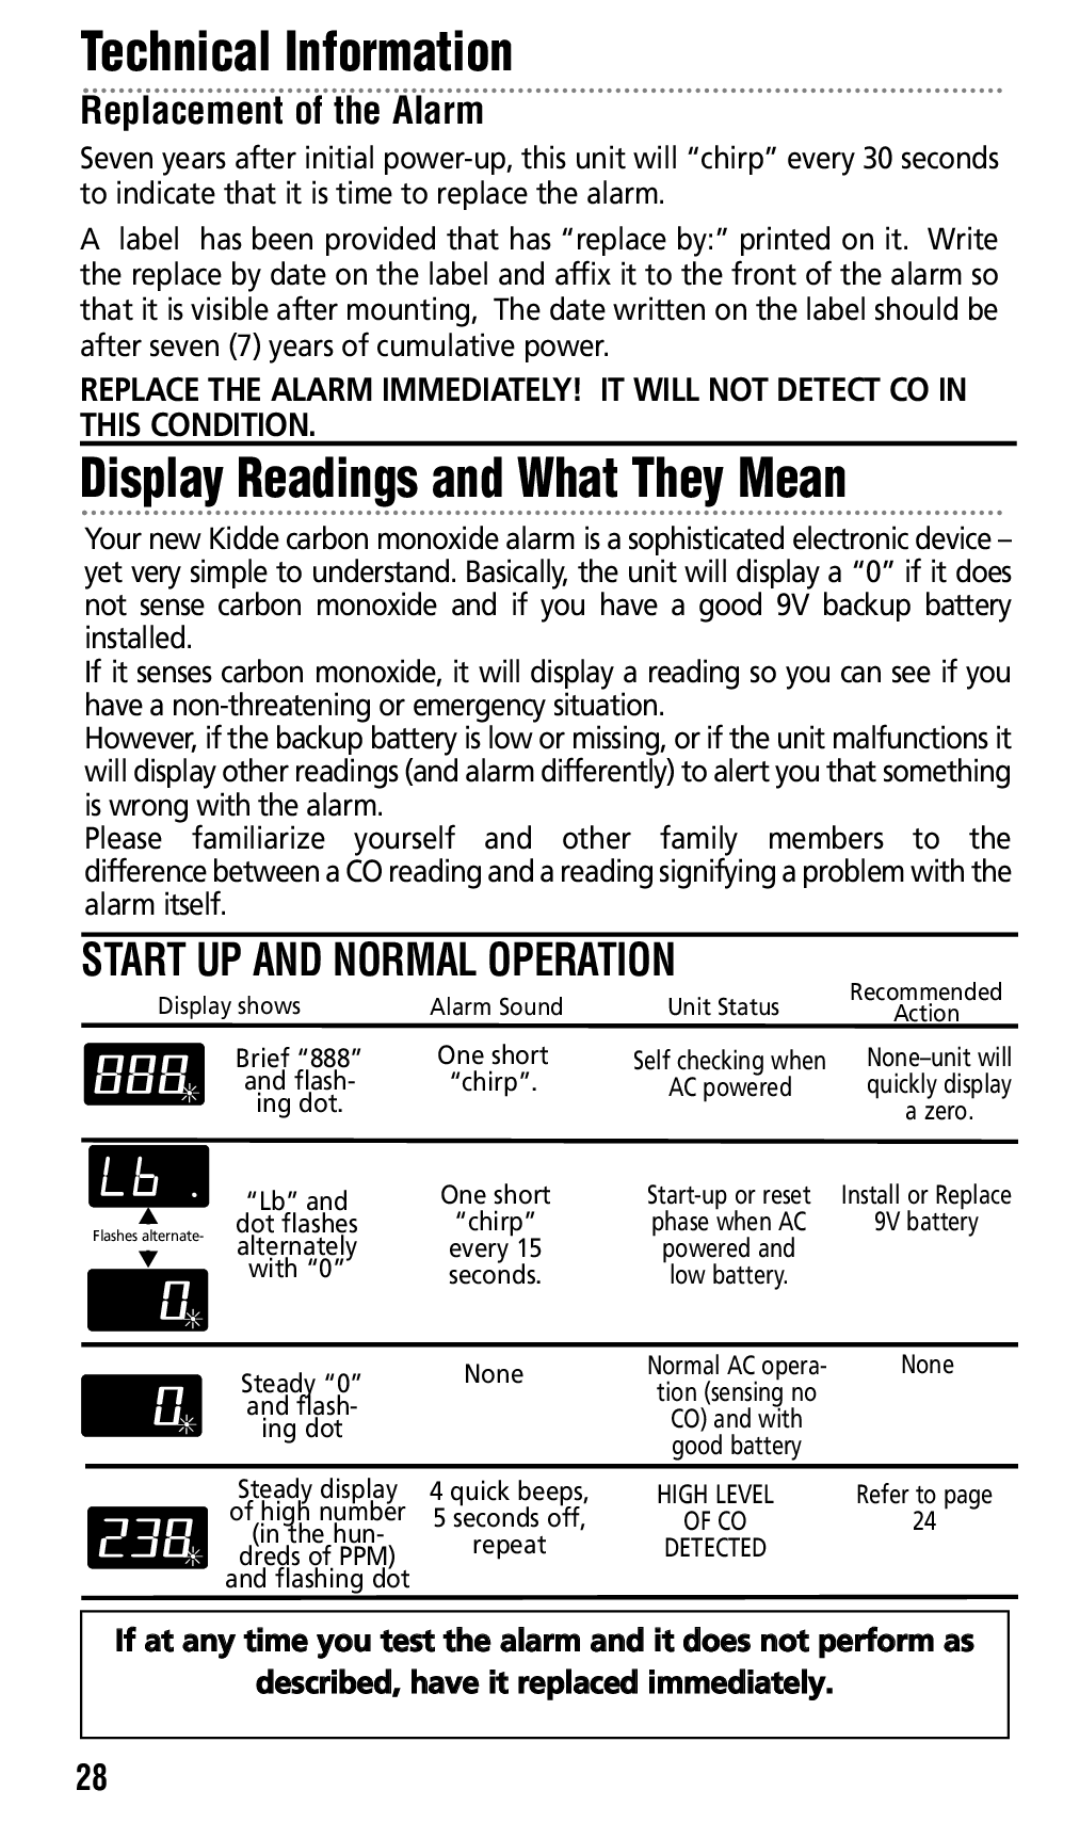 Kidde KN-COPP-3 manual Display Readings and What They Mean, Replacement of the Alarm 